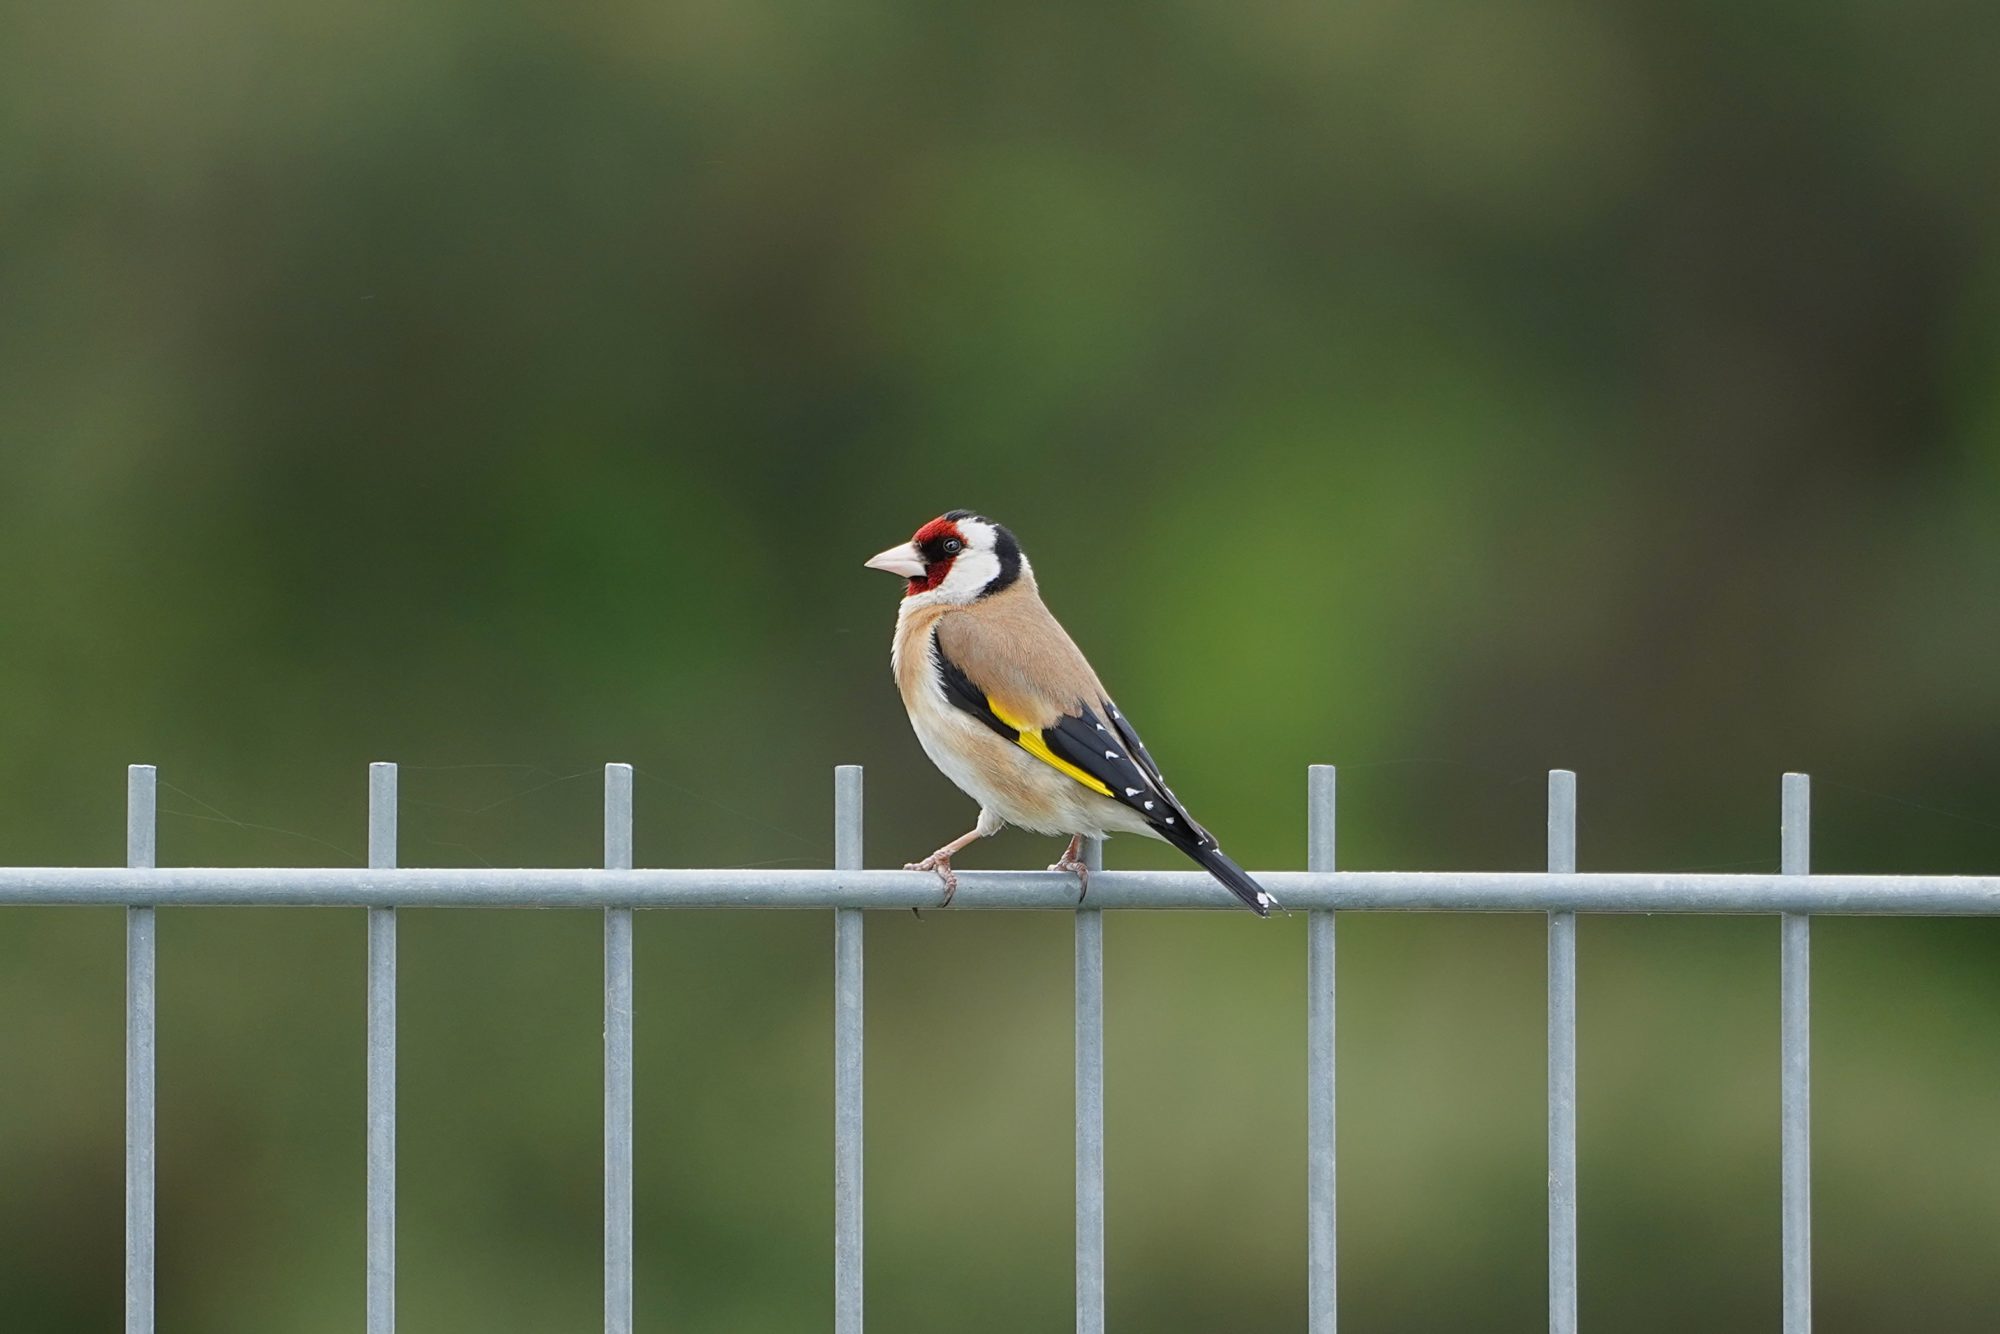 European Goldfinch, a bird with brown, red, white and yellow markings